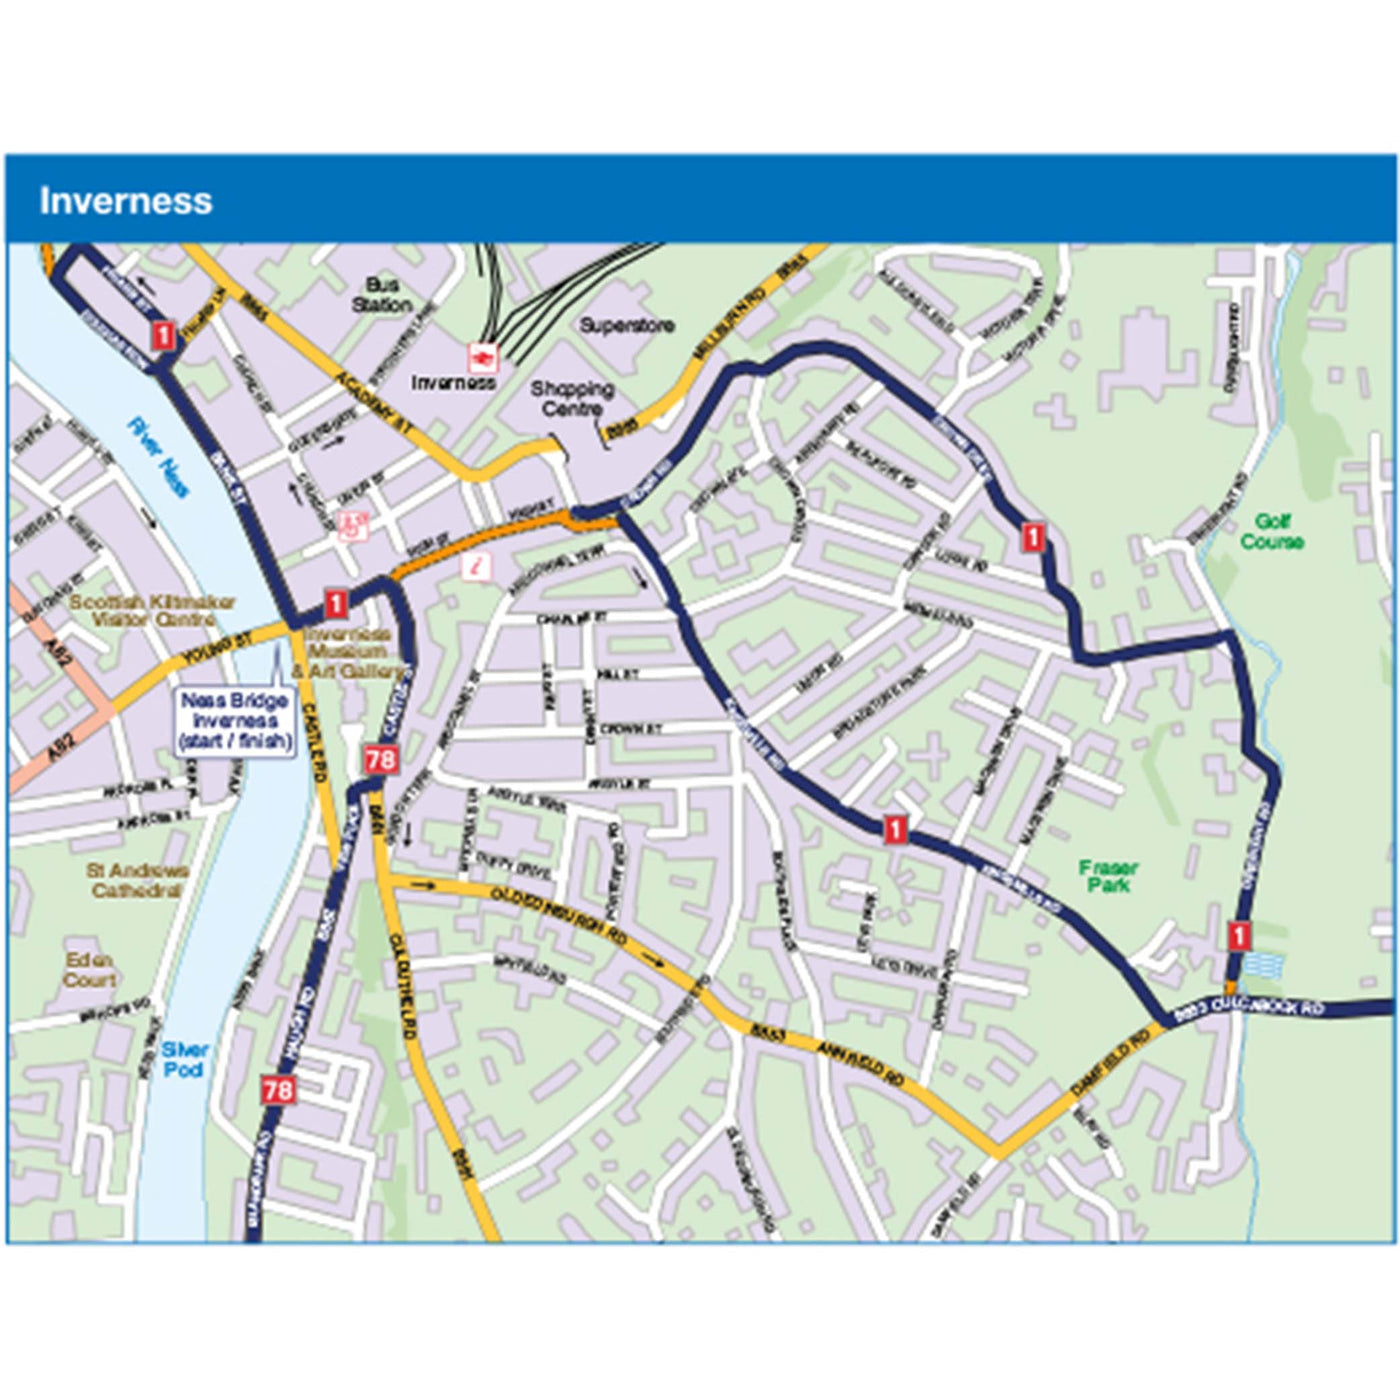 Loch and Glens North cycle route map - town centre sample, Inverness